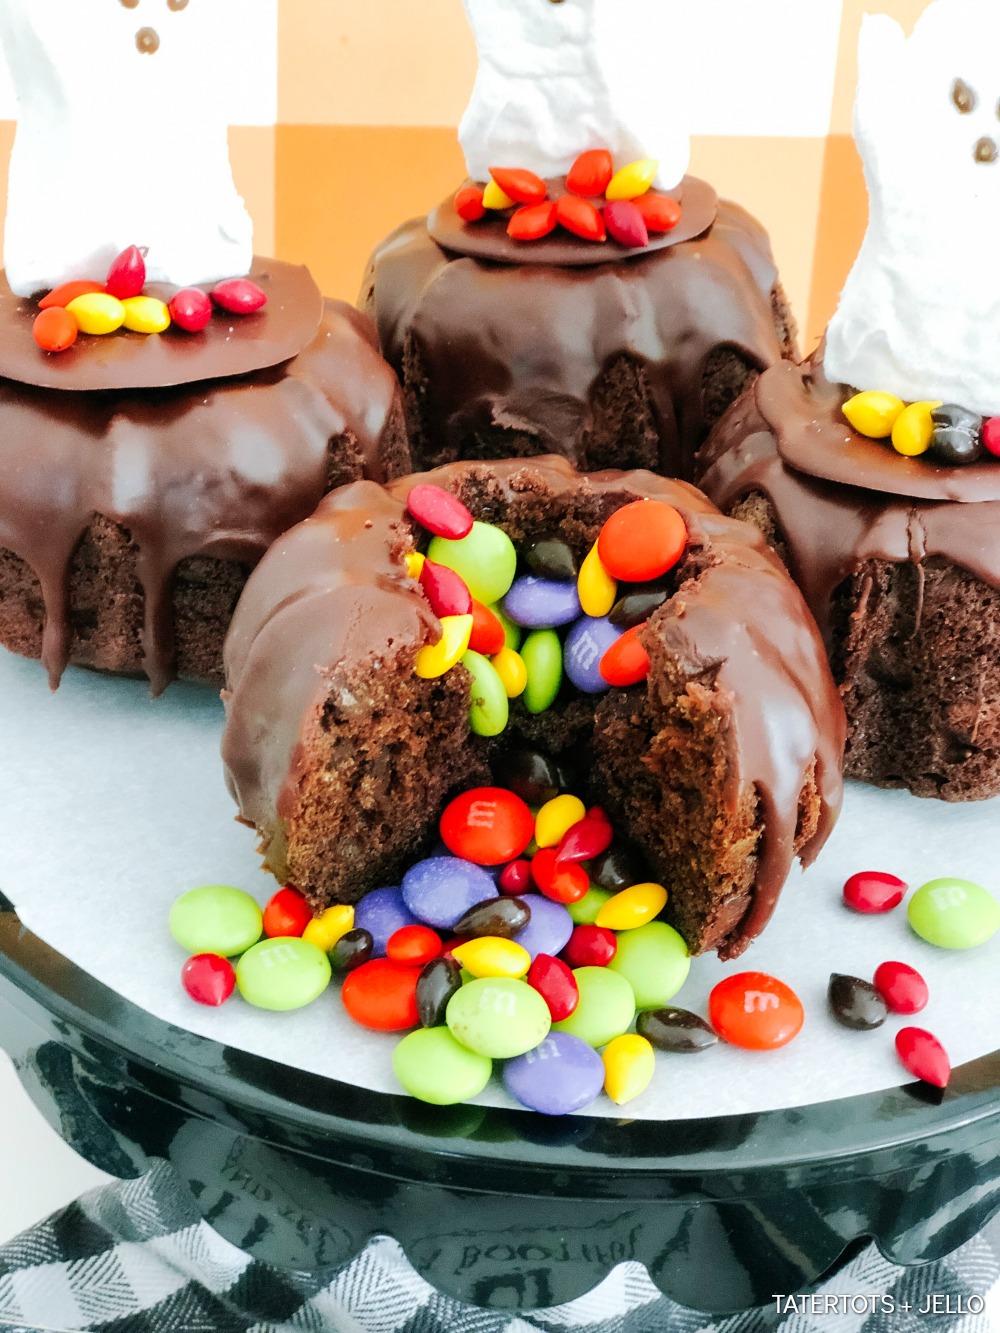 Halloween Cauldron Mini Cakes with Candy Inside! These tiny cakes are perfect for Halloween parties this year and kids will love biting inside to find a candy surprise.